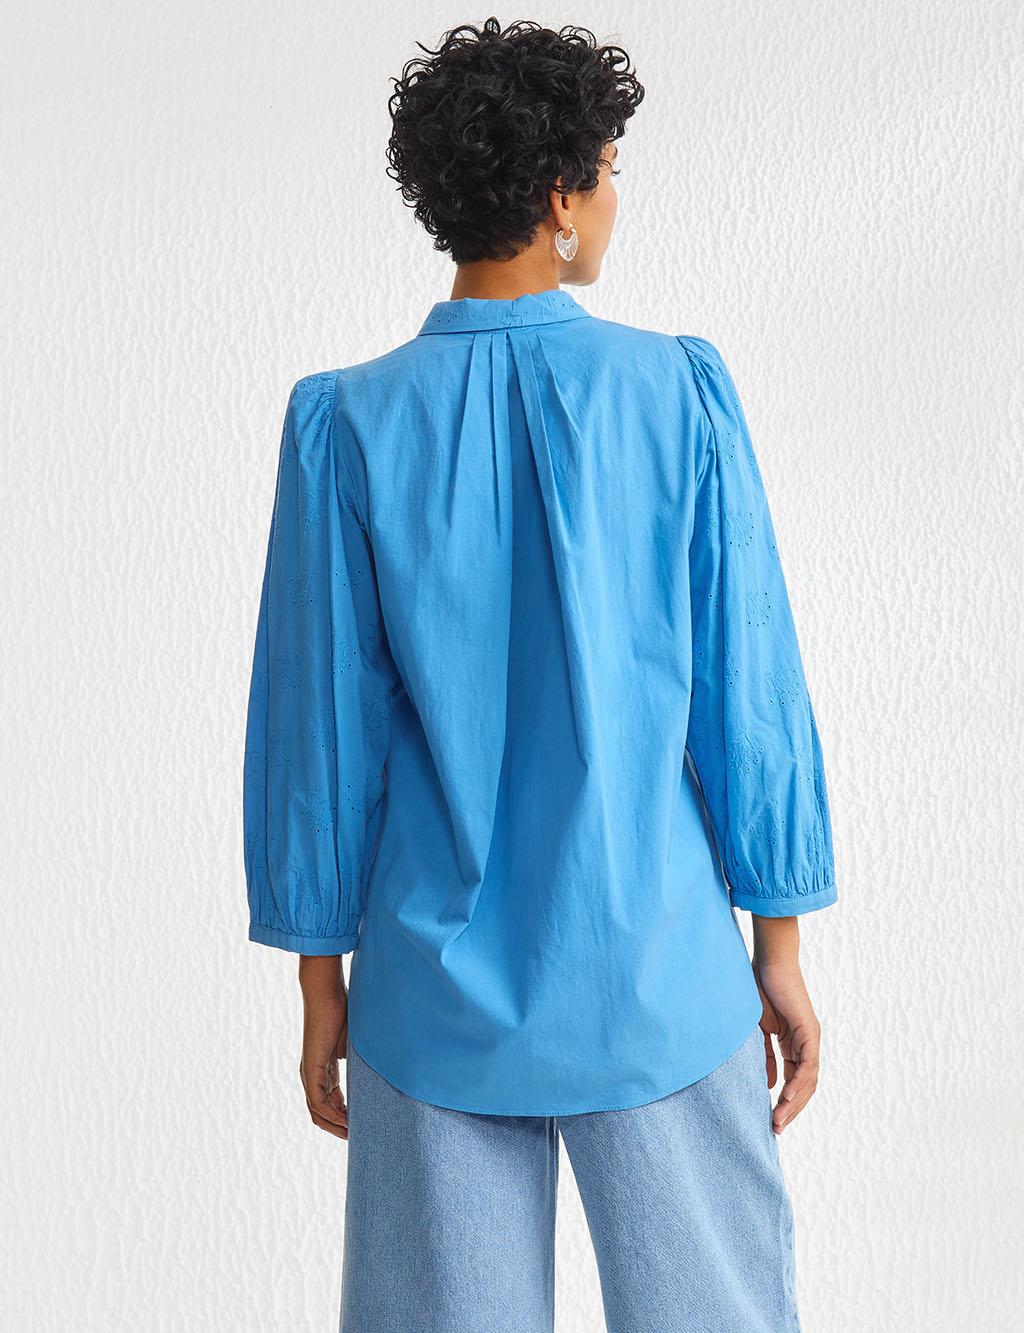 Embroidered Balloon Sleeve Blouse B21 10007 Blue